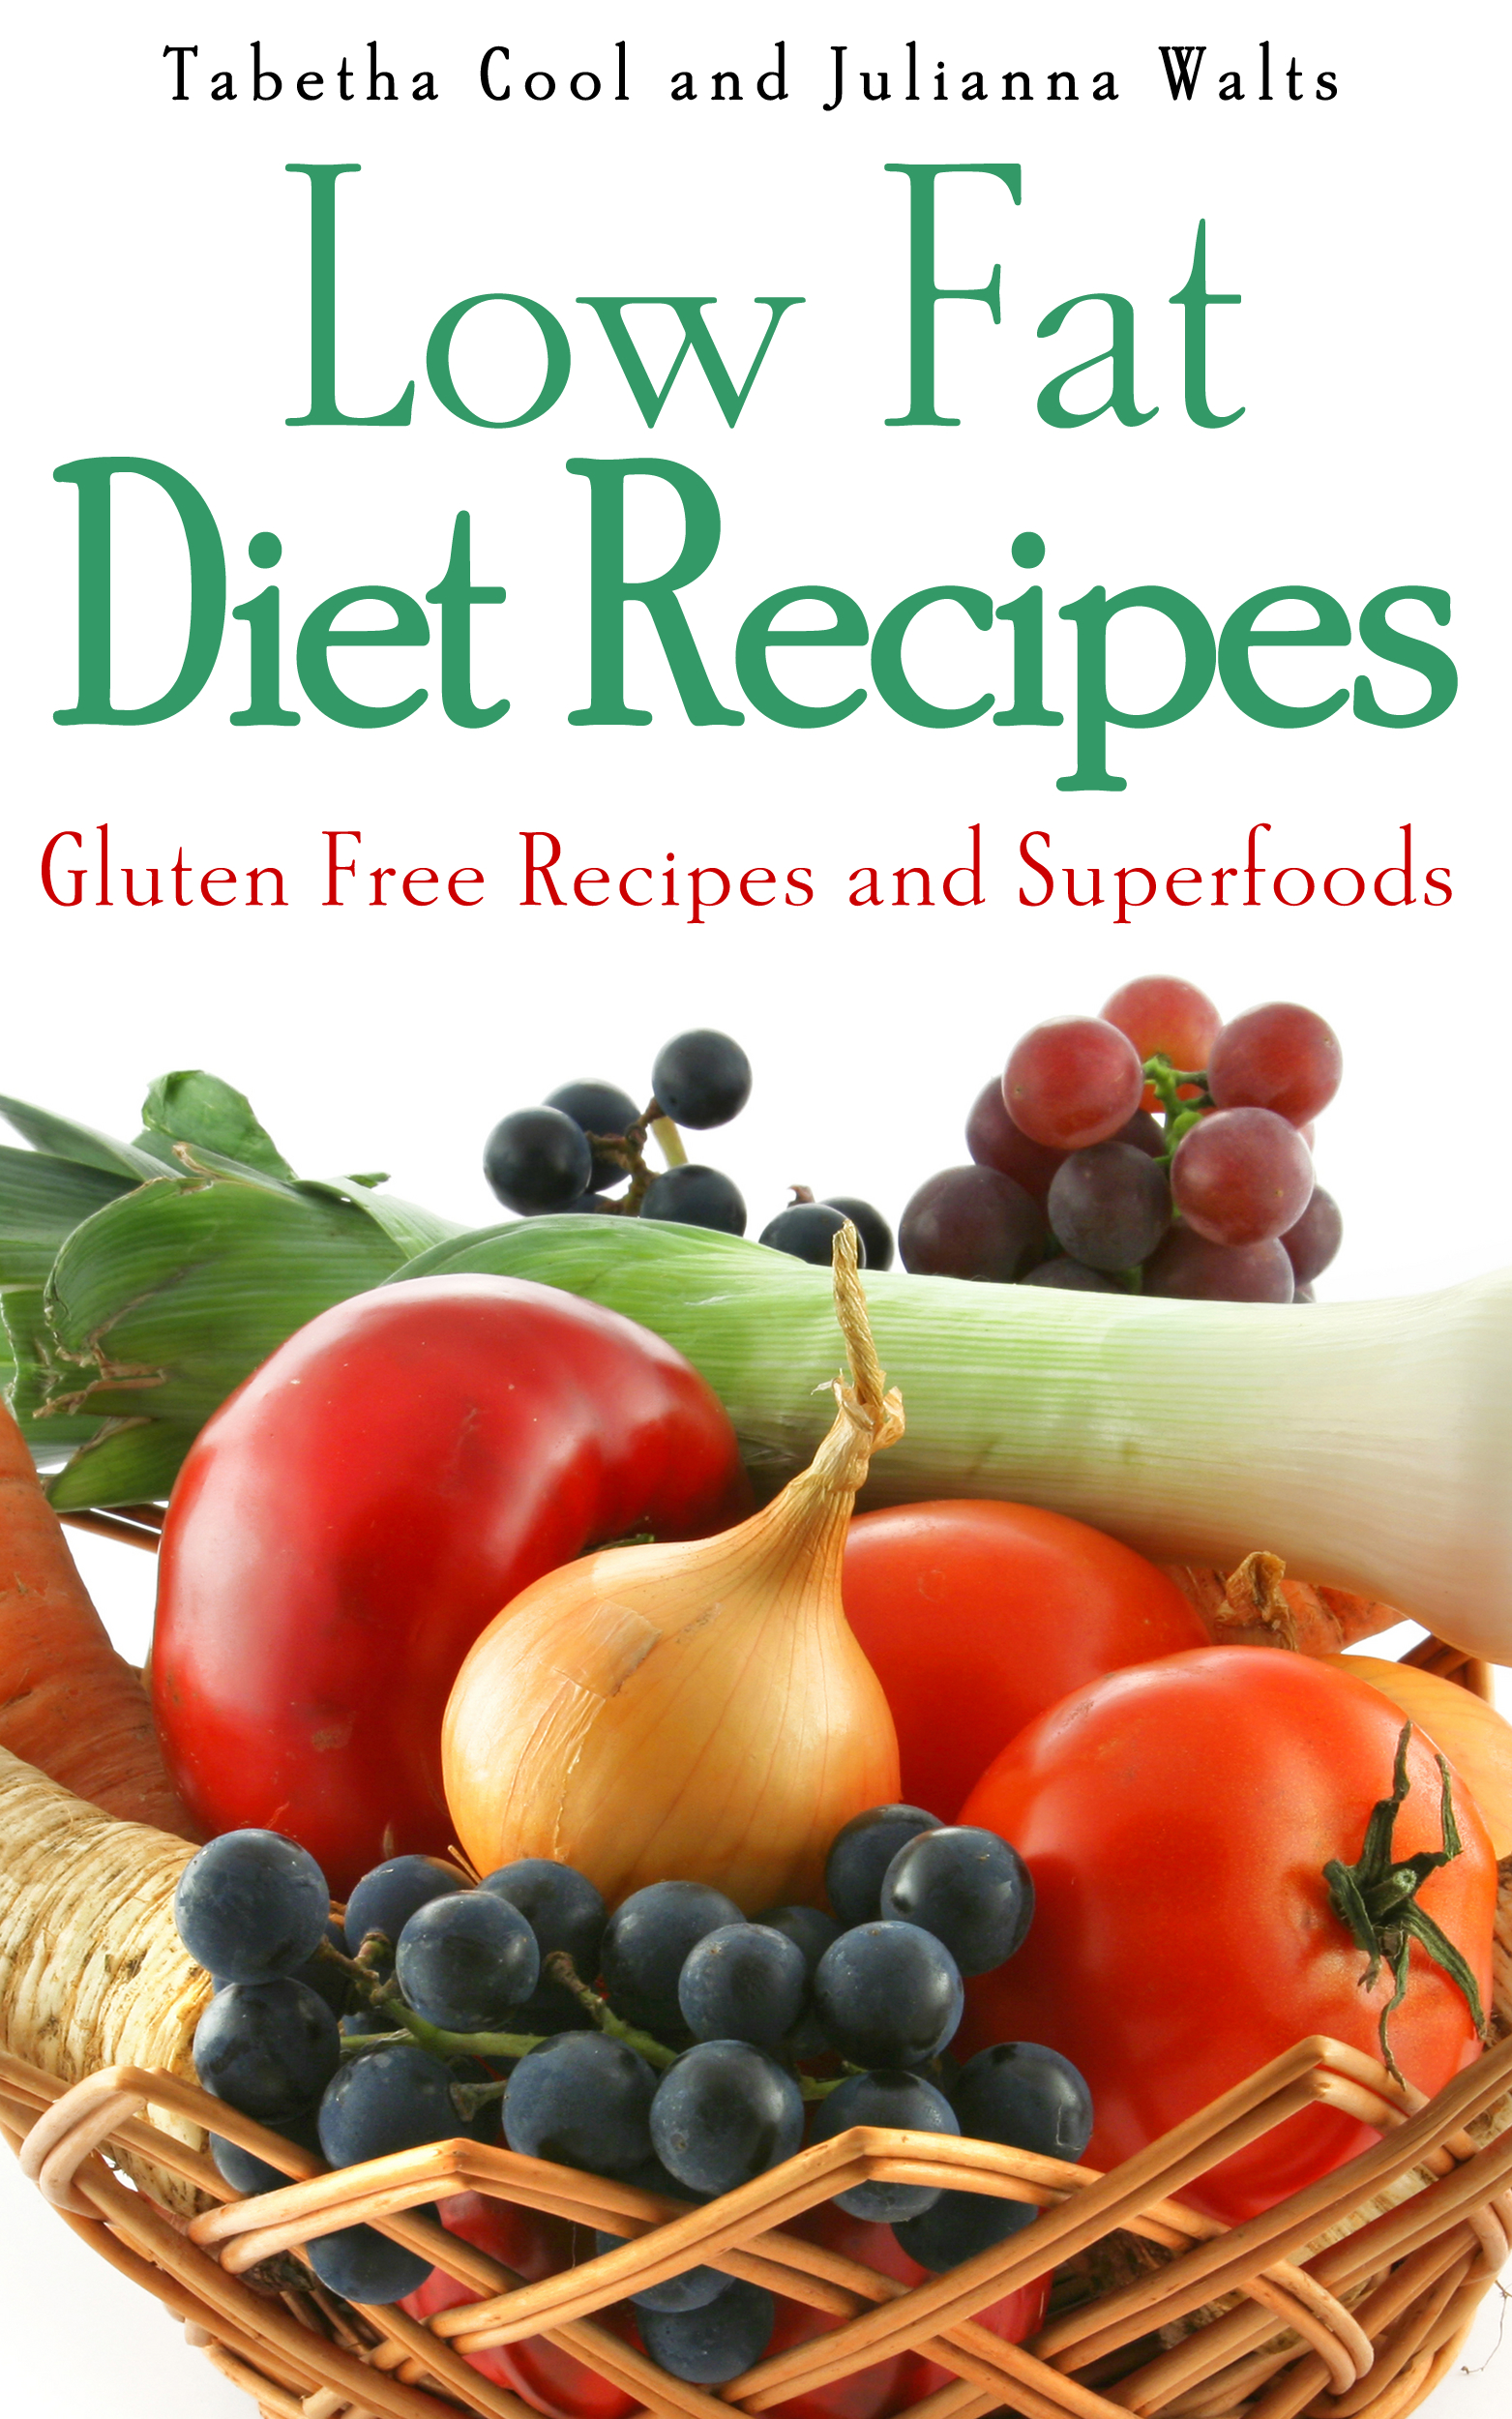 Table of Contents Low Fat Diet Recipes Gluten Free Recipes and Superfoods - photo 1